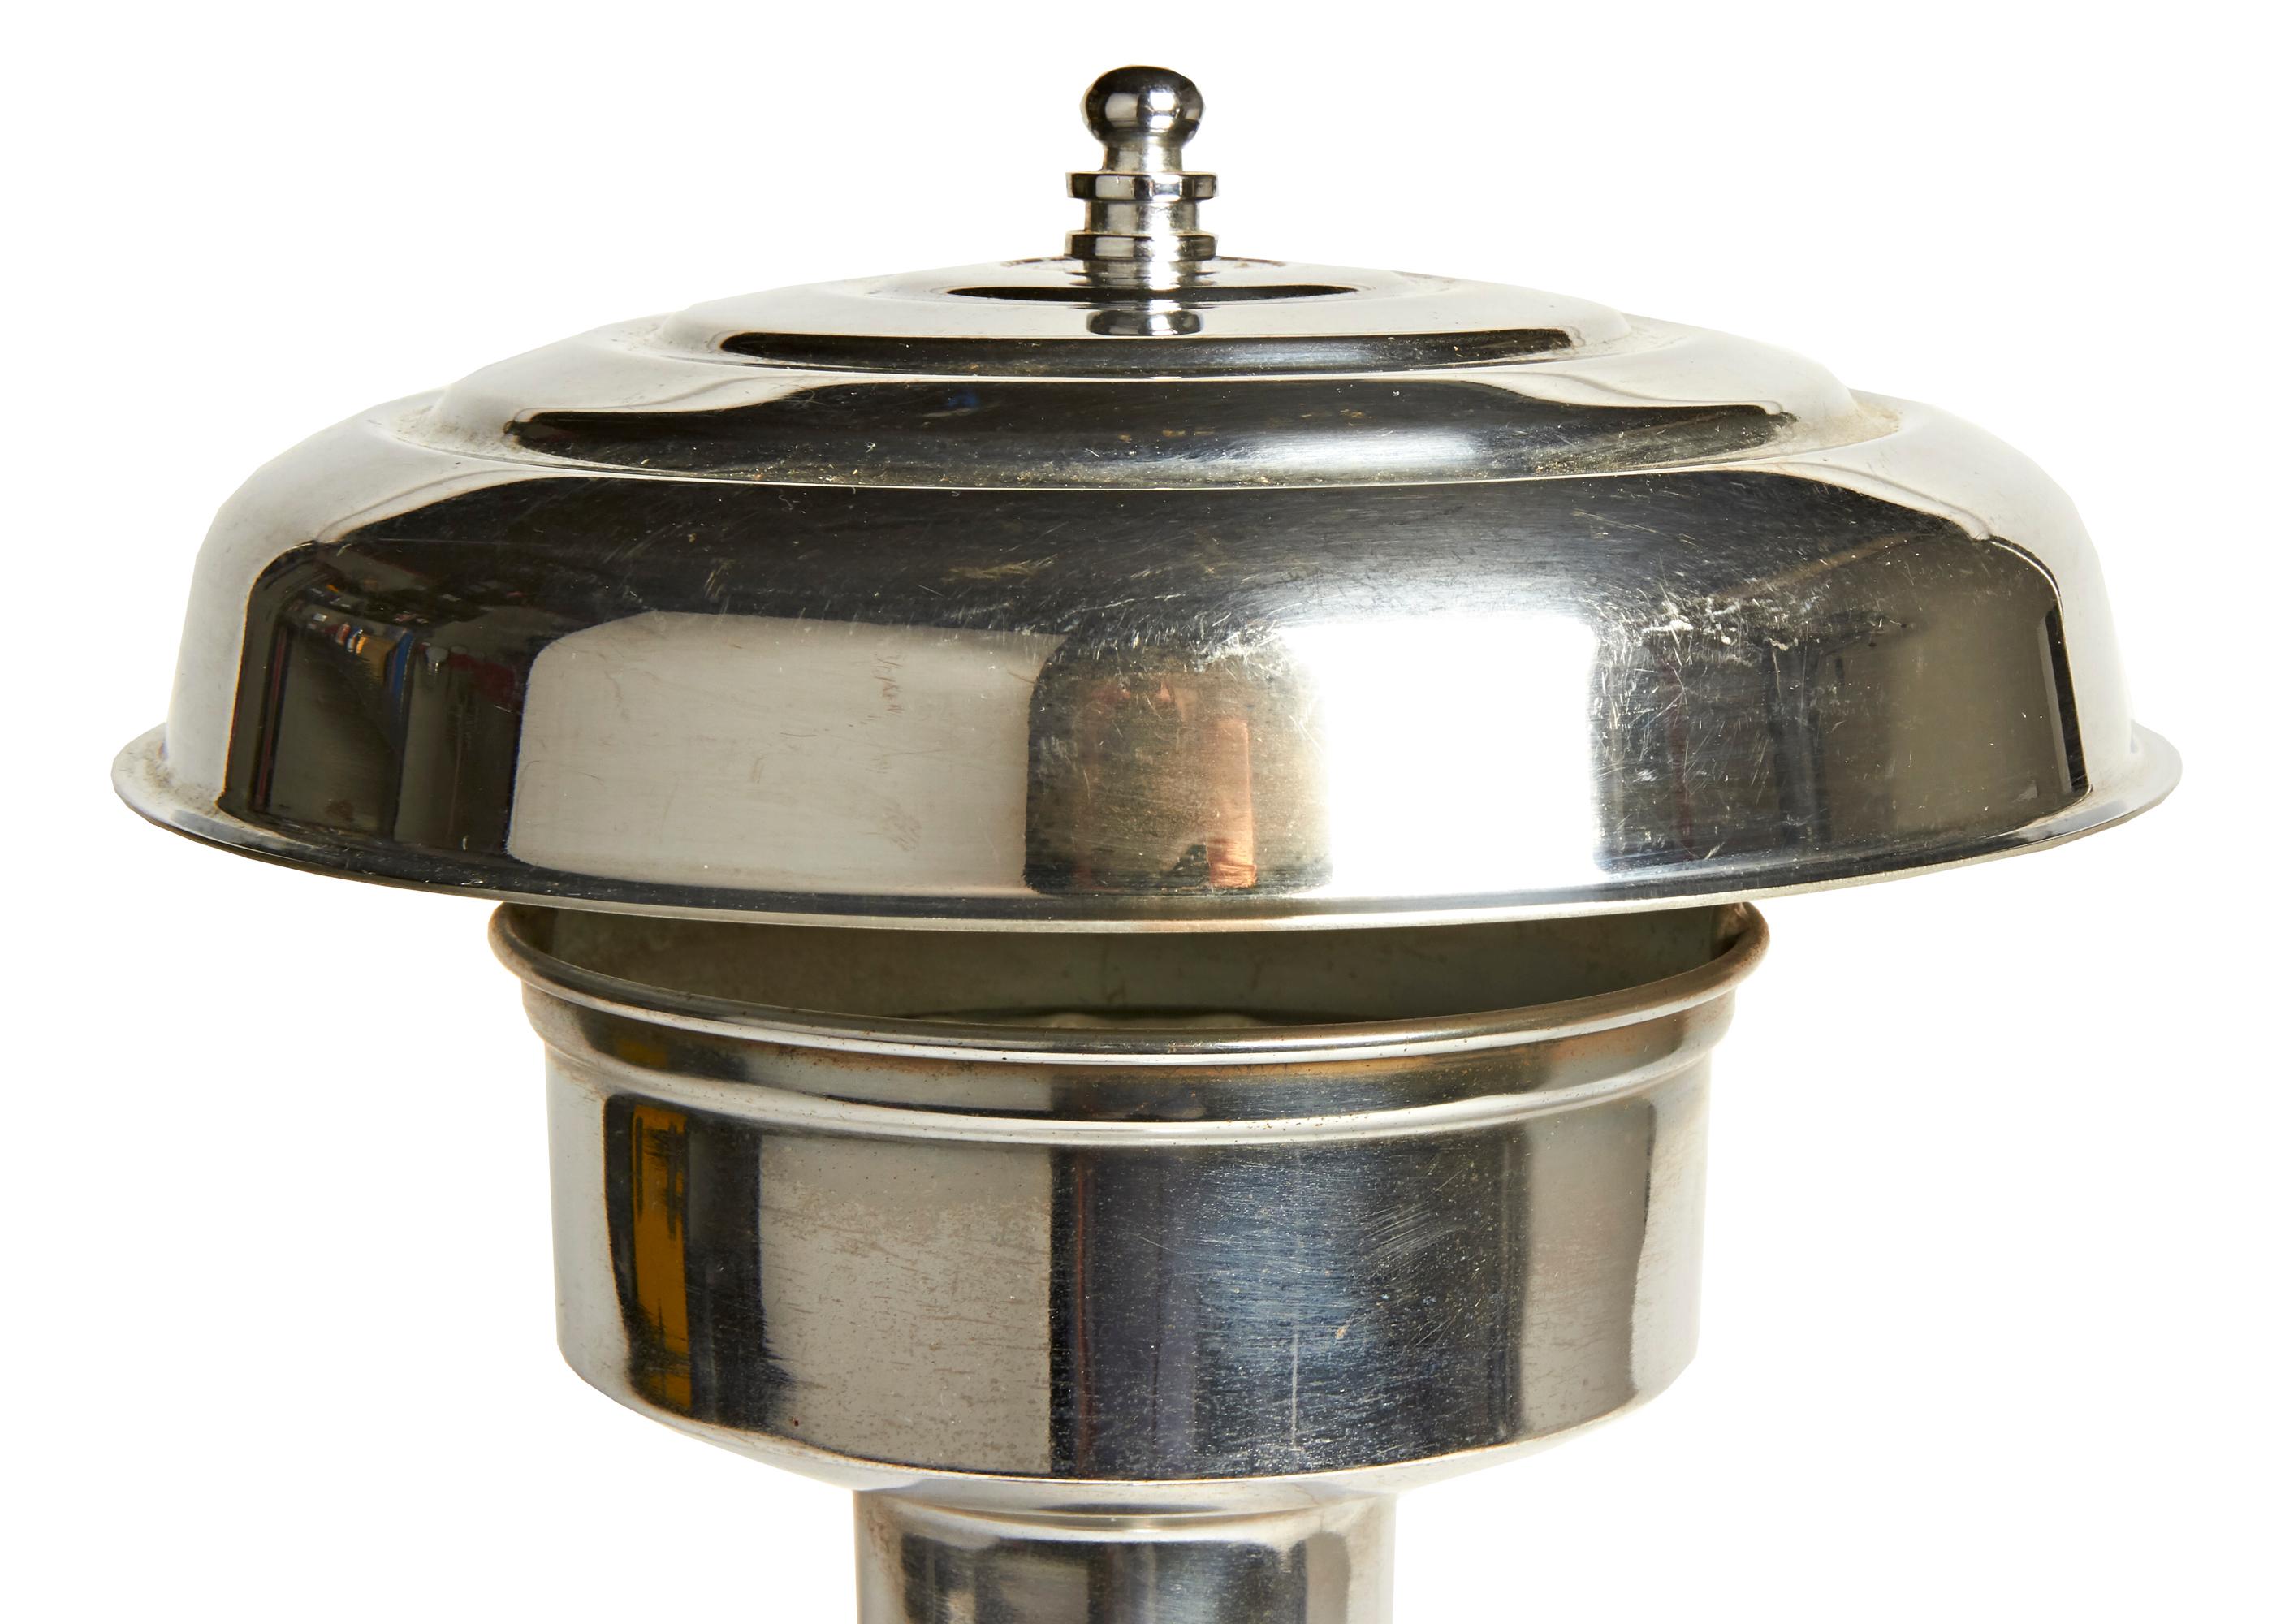 This tall and elegant American Art Deco chrome-plated table lamp features a weighted stepped base with its original brown baize covering. A fluted column rises up from the base and is topped by a two level, chrome gallery that holds its original